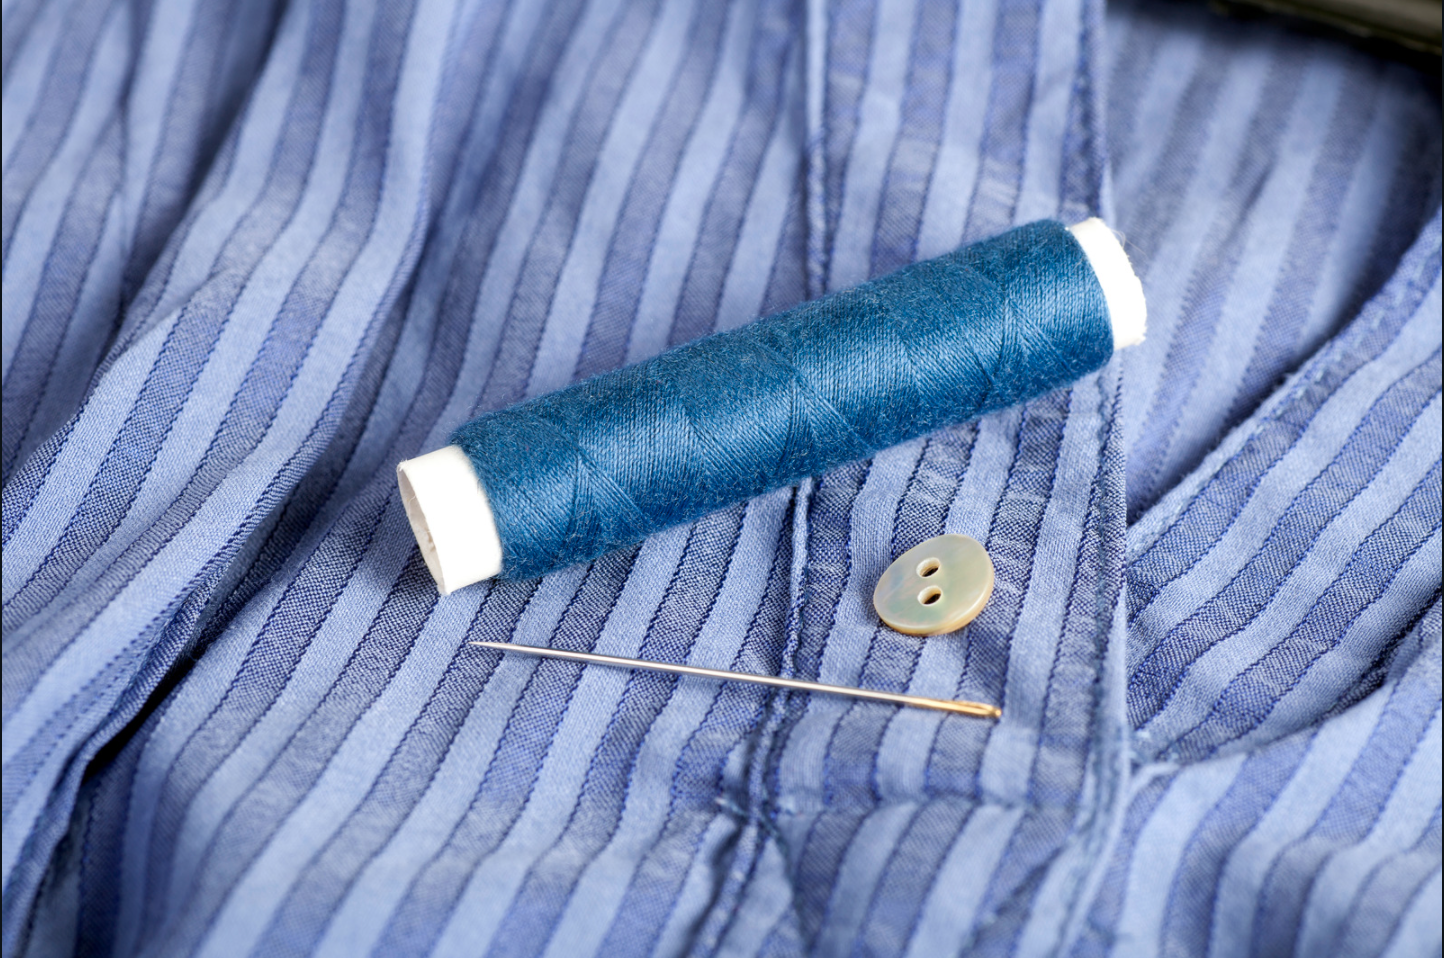 Blue pinstriped shirt and a spool of blue thread overtop. Next to that are a need and button indicating the button needs to be reattached to the shirt.